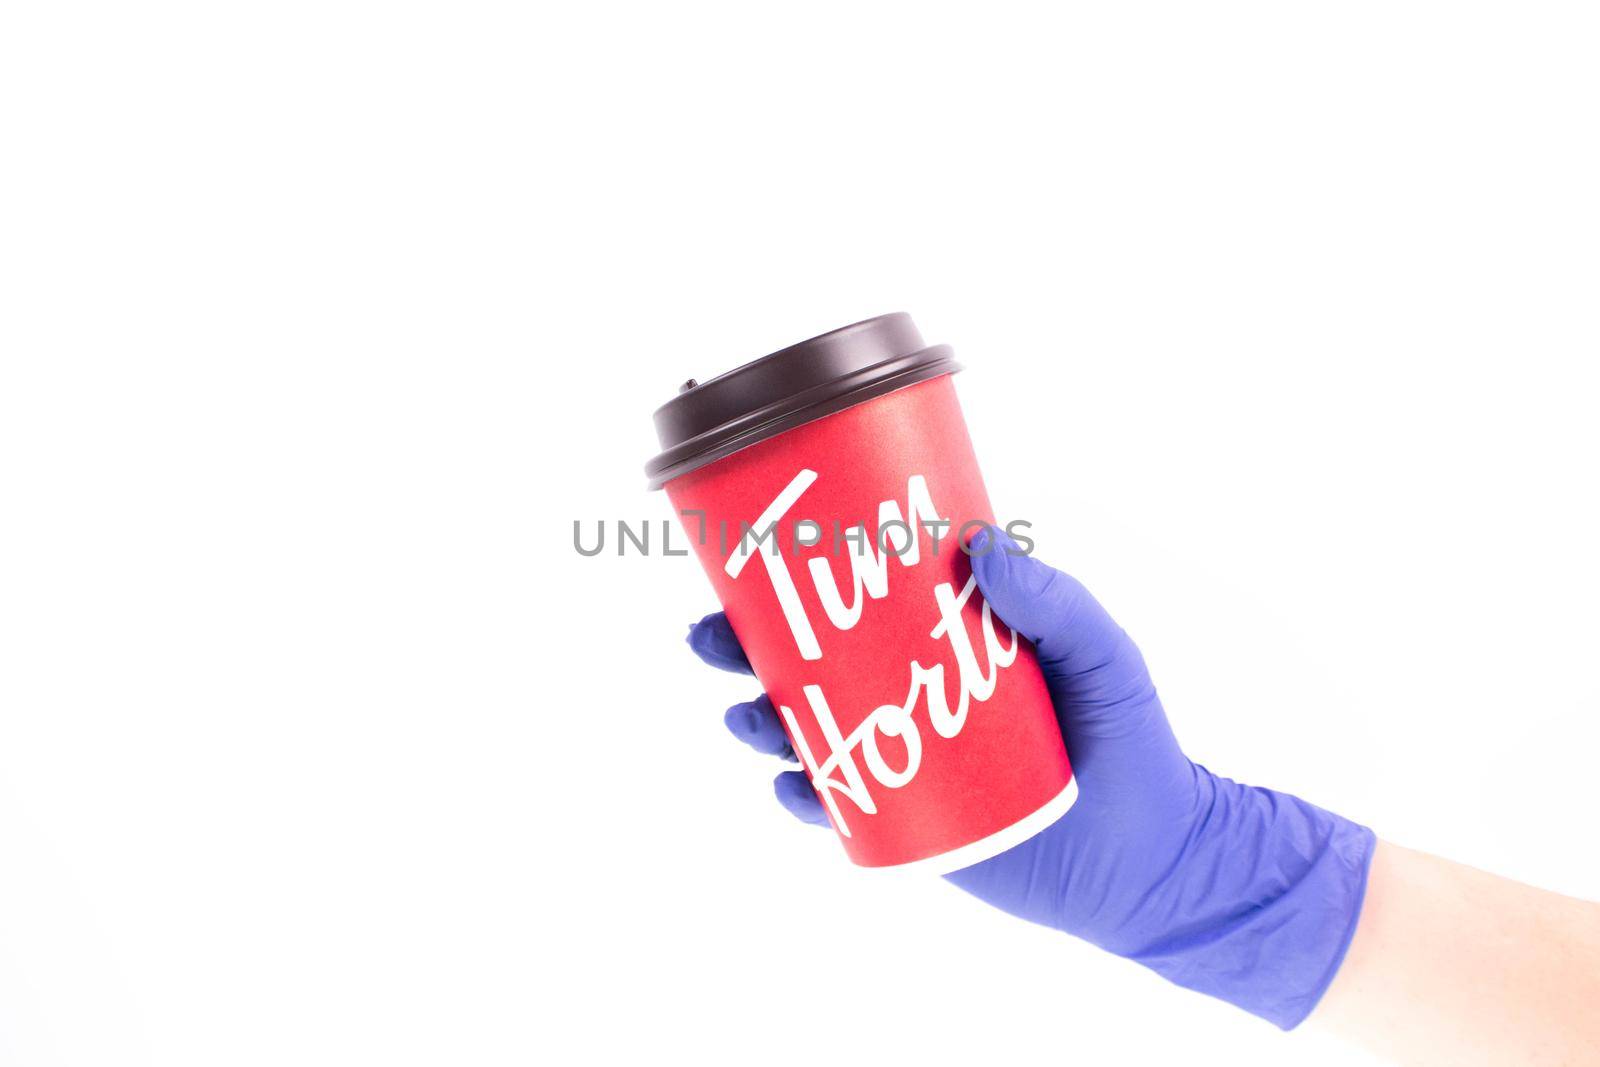 Nurse hand in medical glove holding a Tim Hortons Large Cup of Coffee. Red Tims coffee cup. Gatineau, Quebec, Canada August 4, 2022 by JuliaDorian